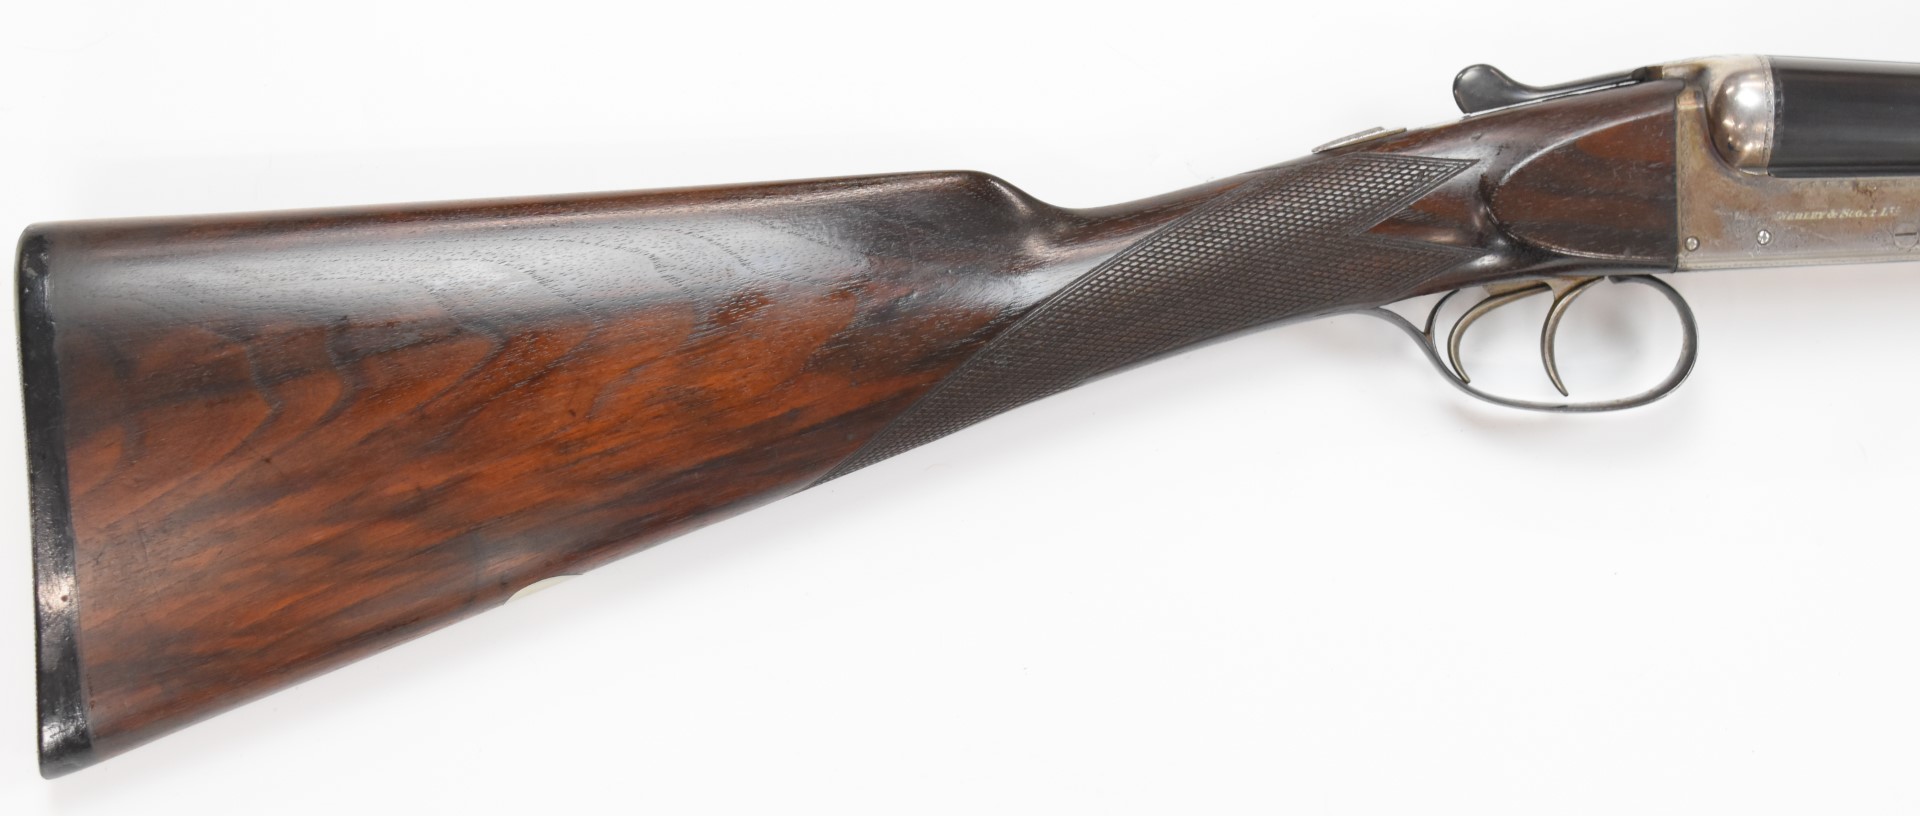 Webley & Scott 12 bore side by side ejector shotgun with named and engraved lock, border engraved - Image 3 of 6